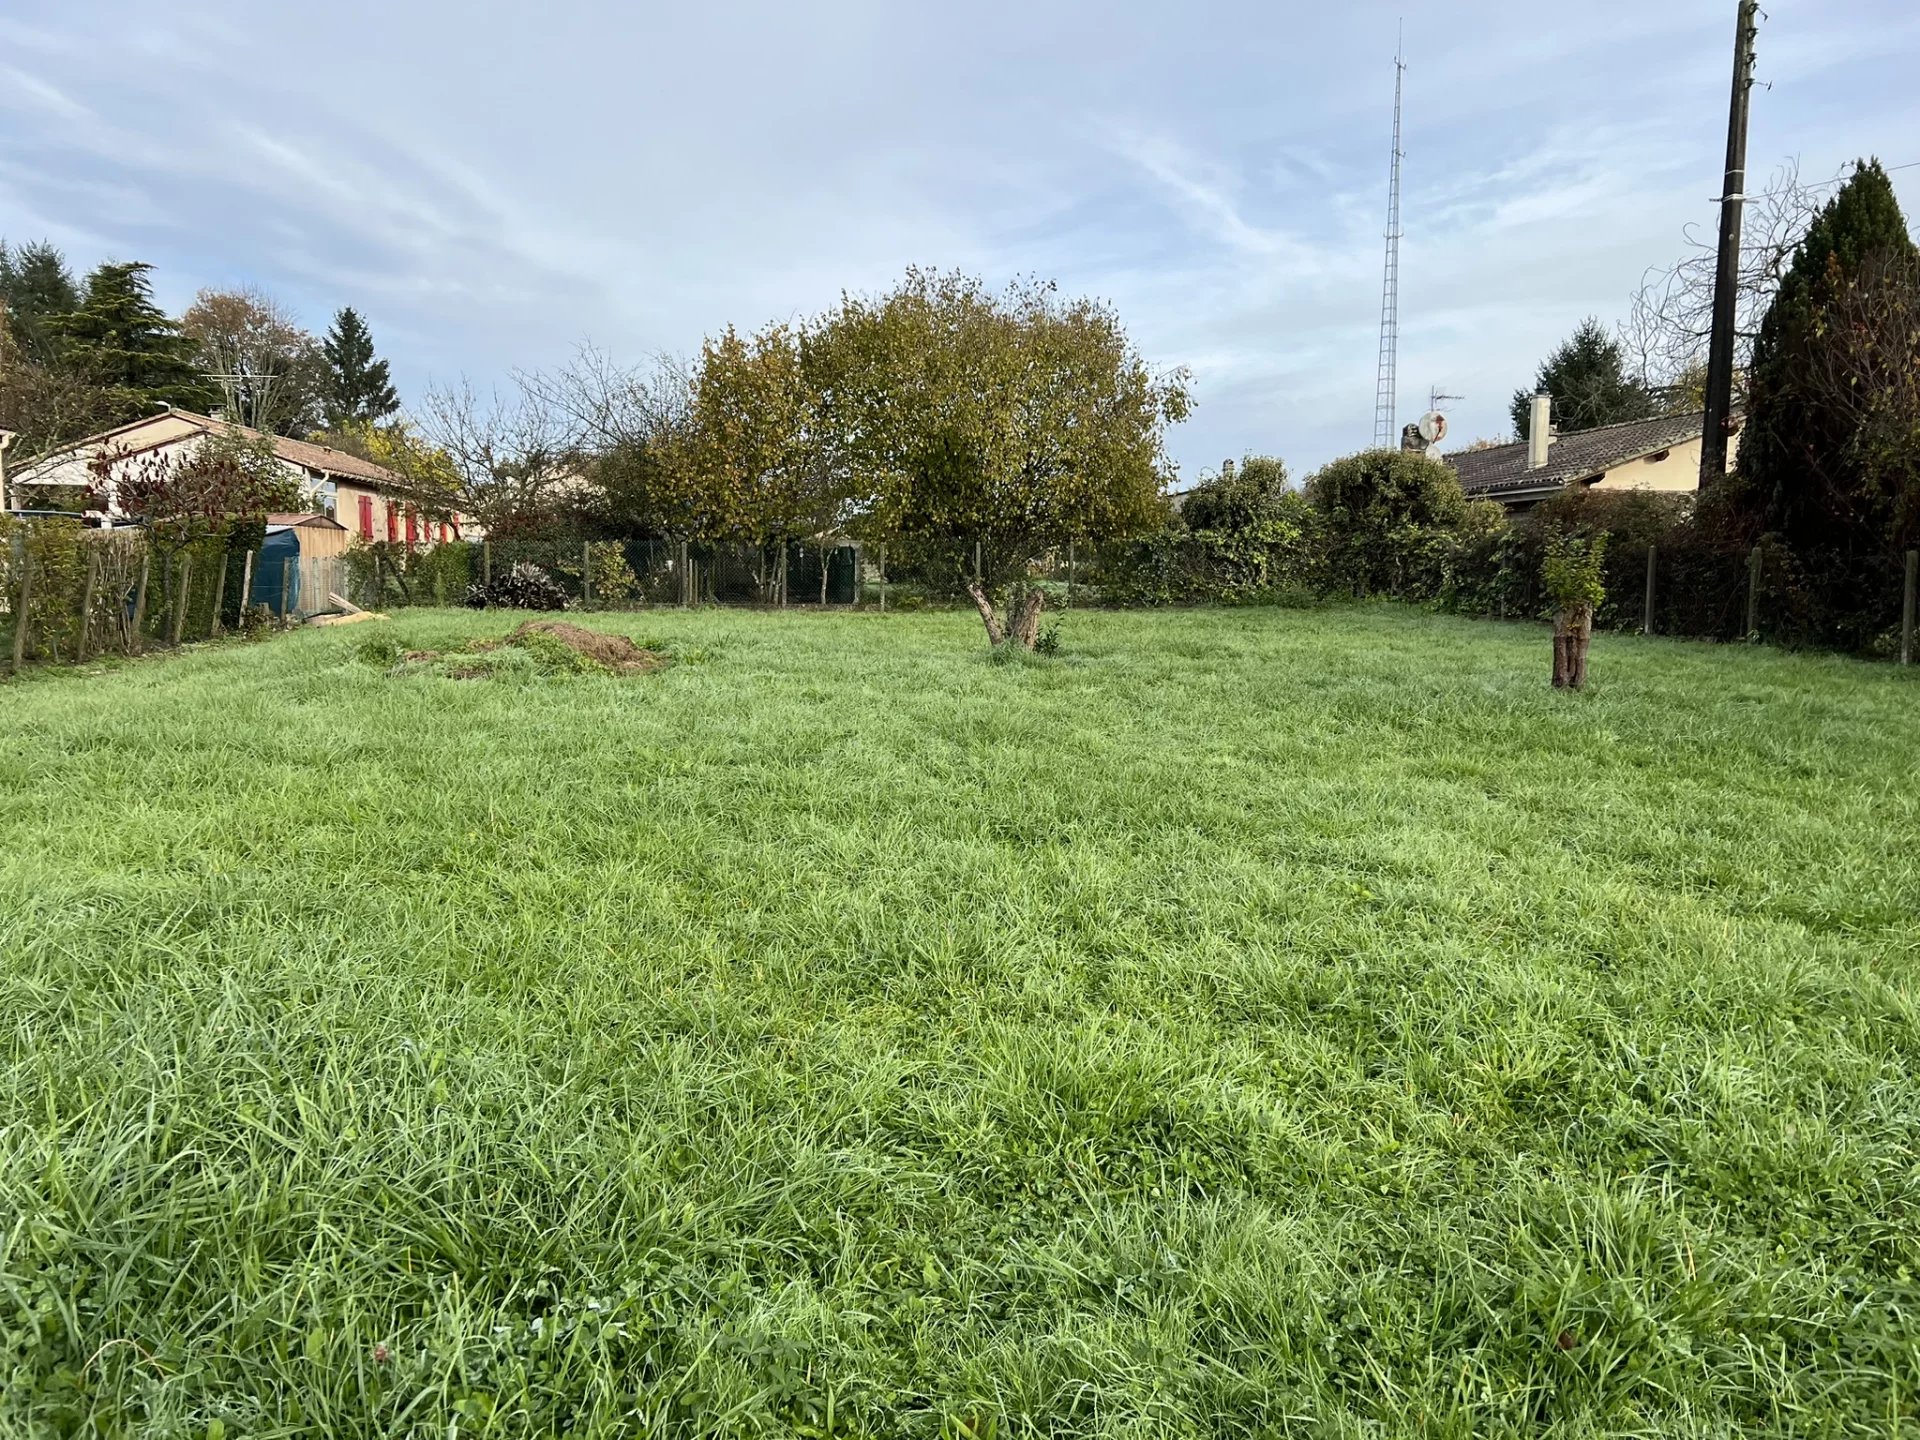 Constructible land in centre of village